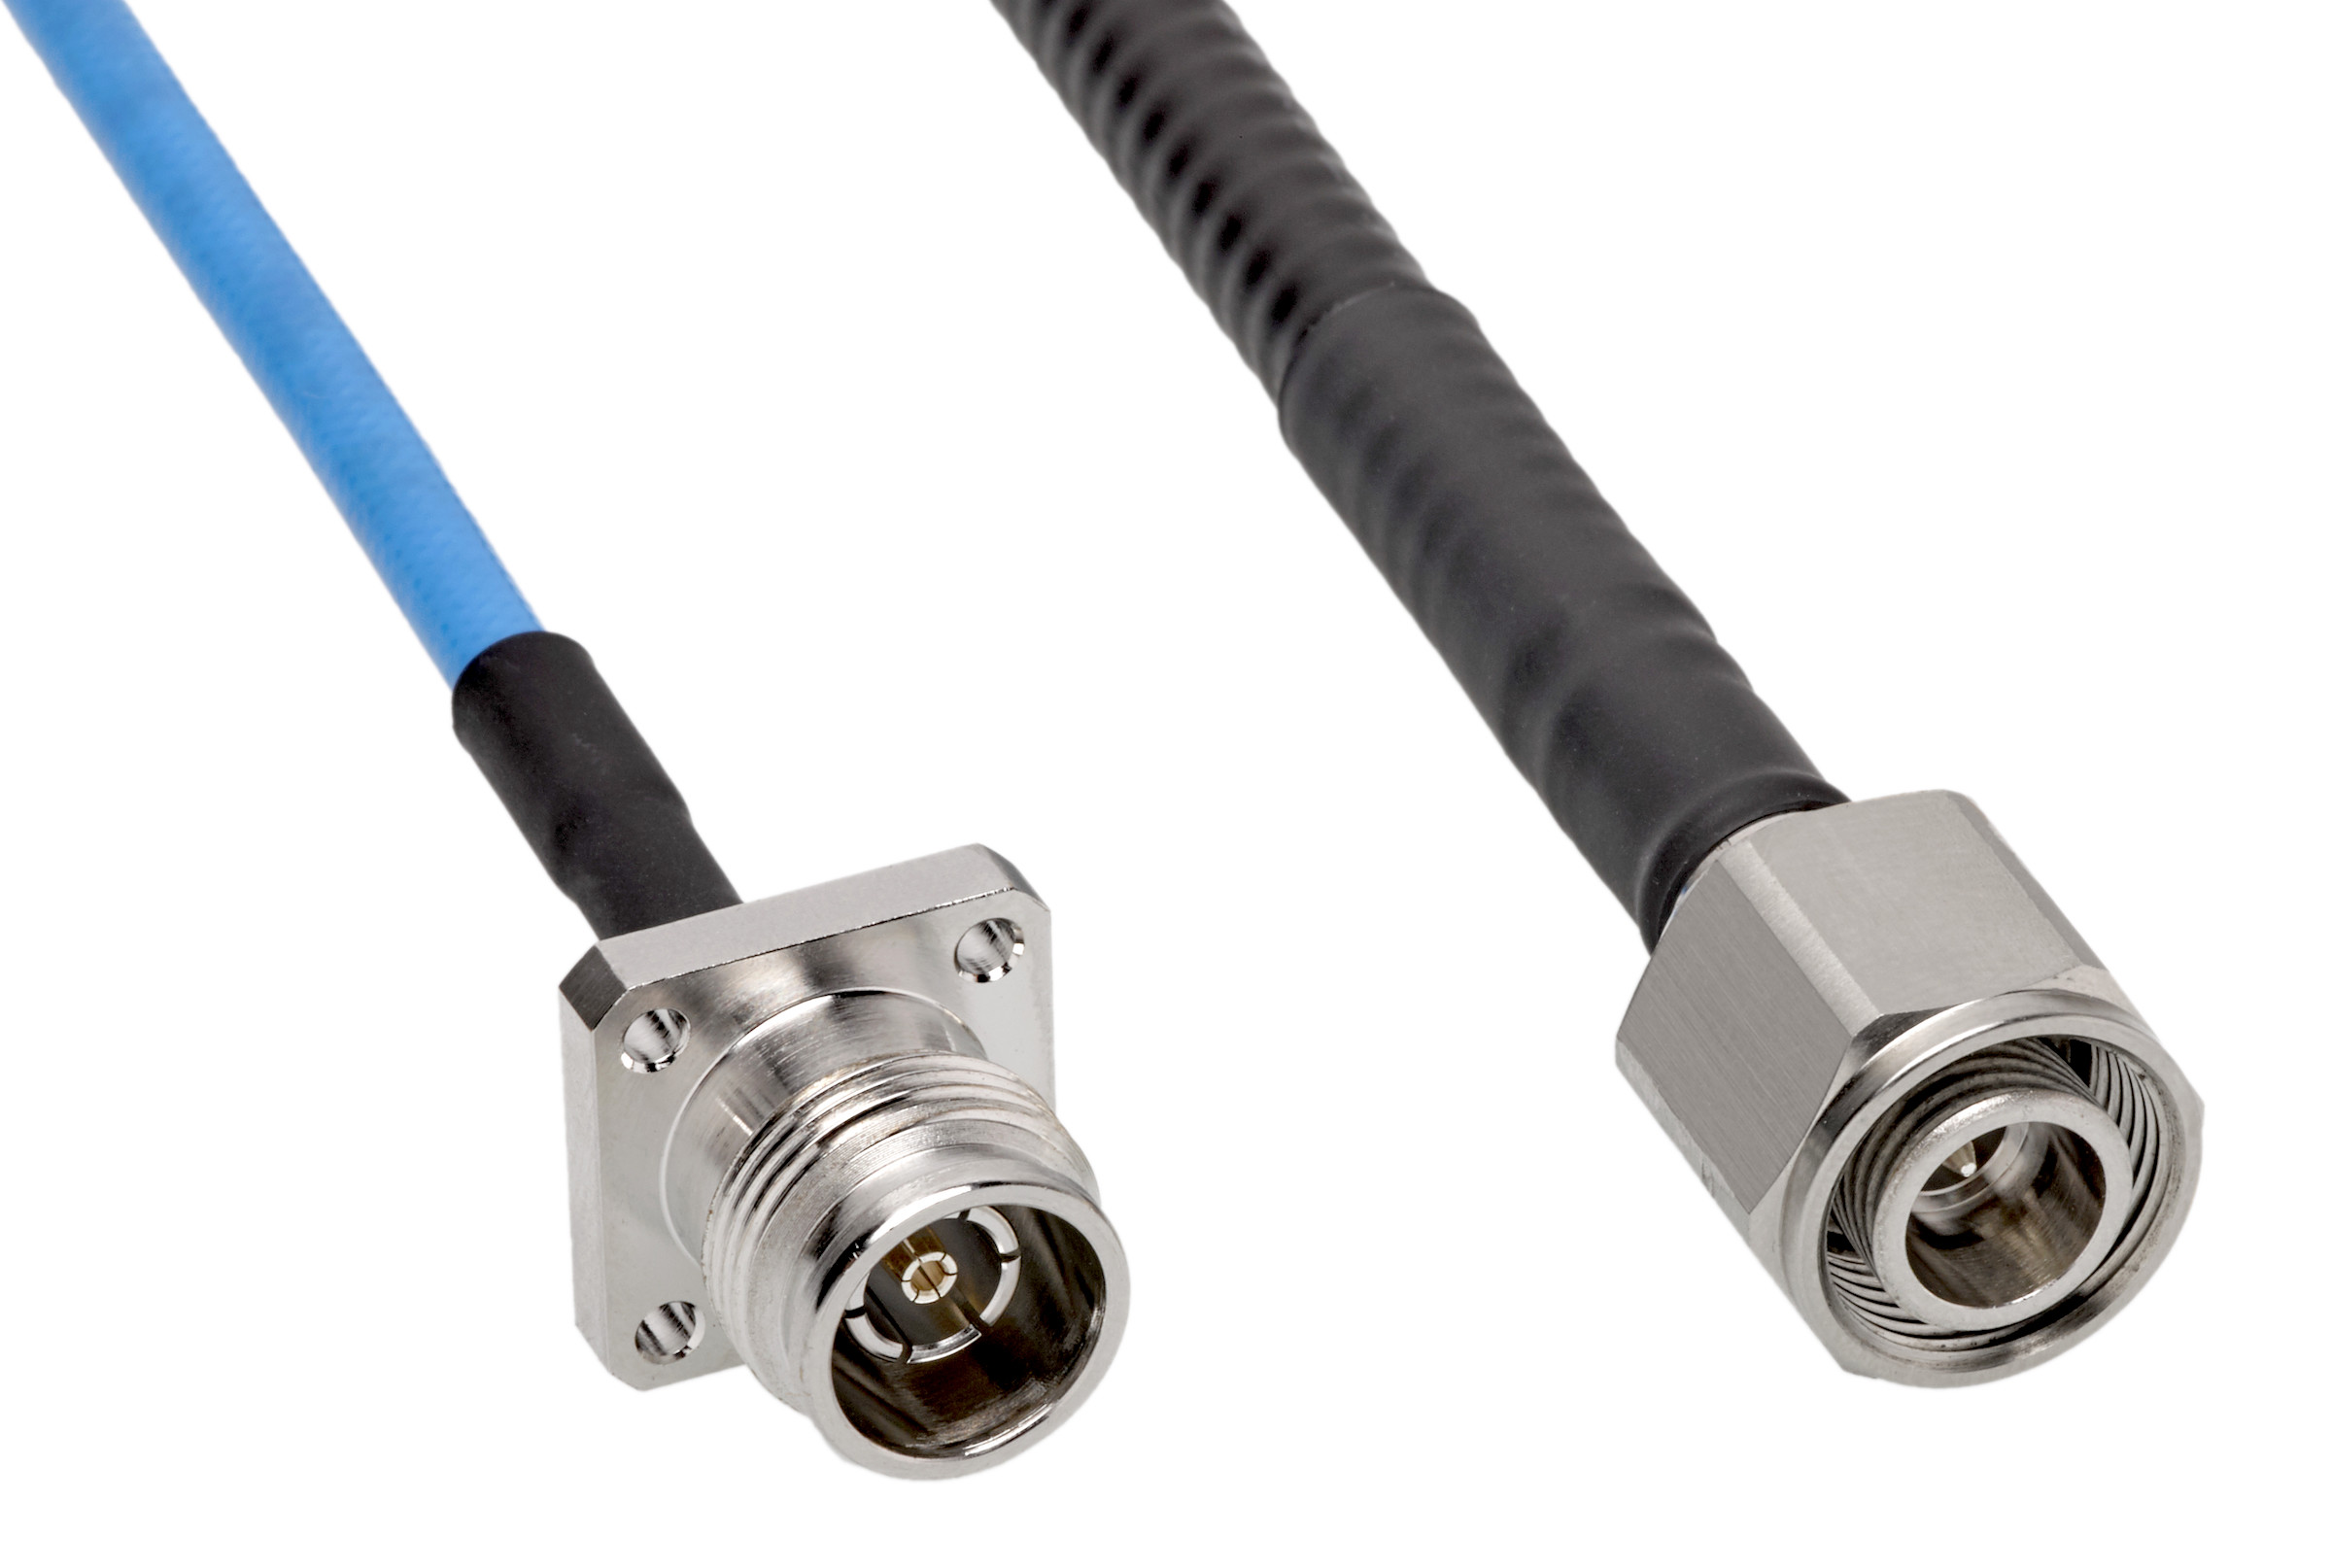 new connector and cable products: February 2019 - Molex 2.2-5 RF connectors and cable assemblies